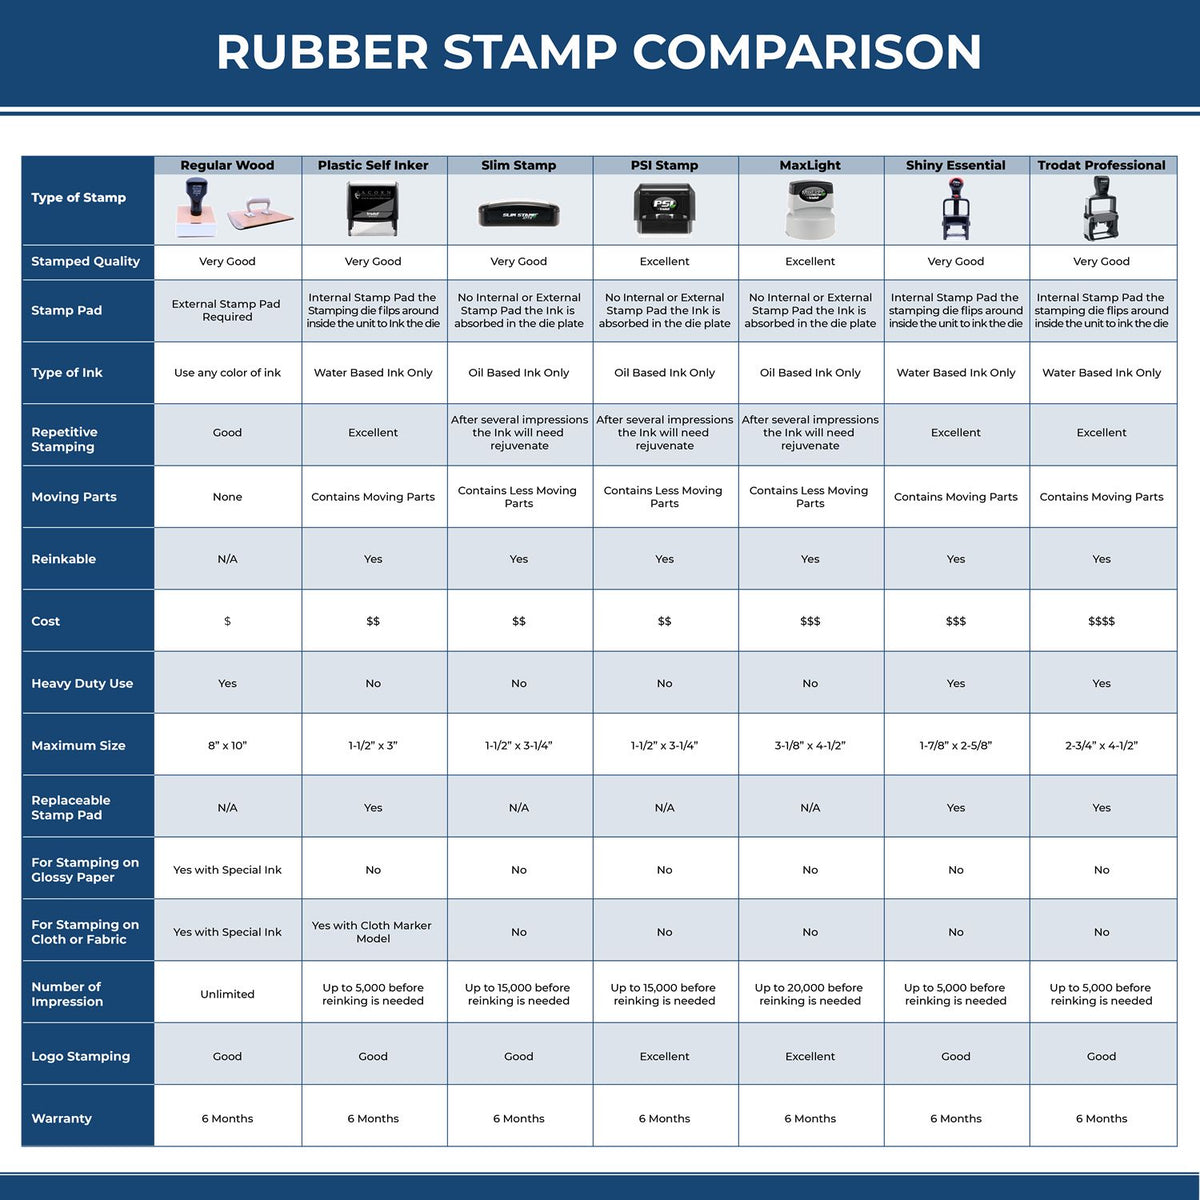 A comparison chart for the different types of mount models available for the Idaho Professional Engineer Seal Stamp.